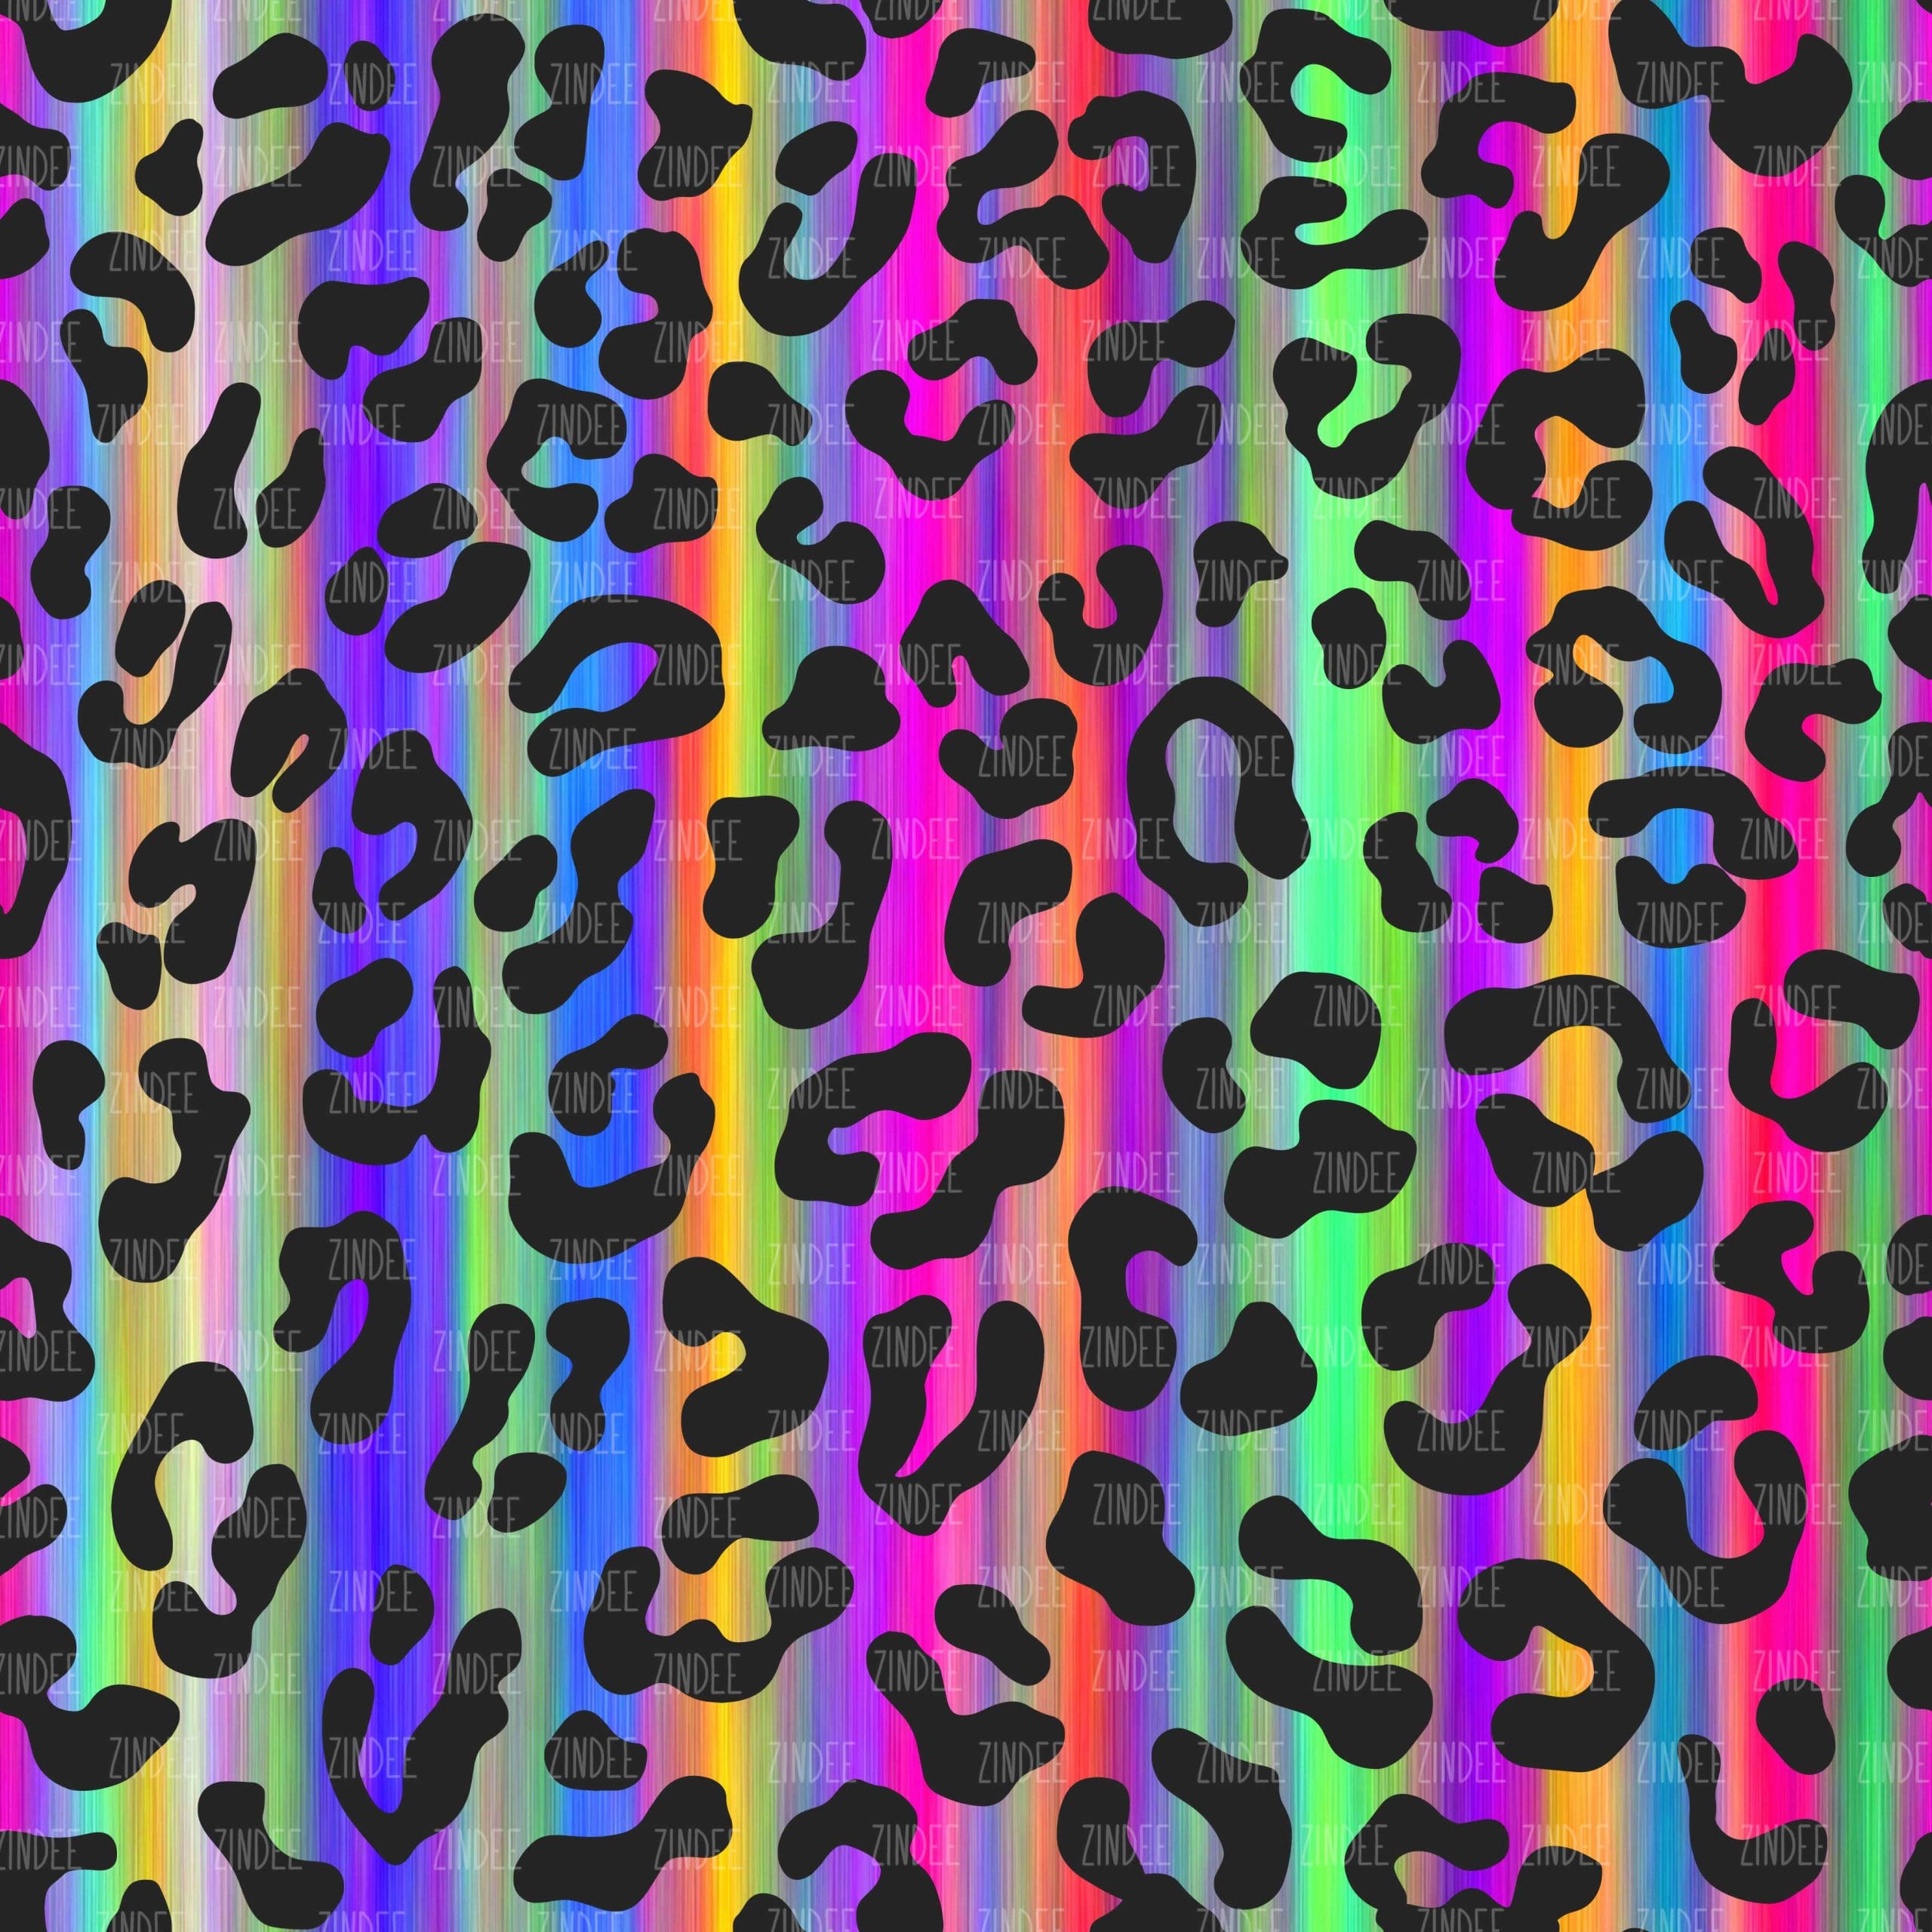 Green Leopard Print Live Wallpaper::Appstore for Android